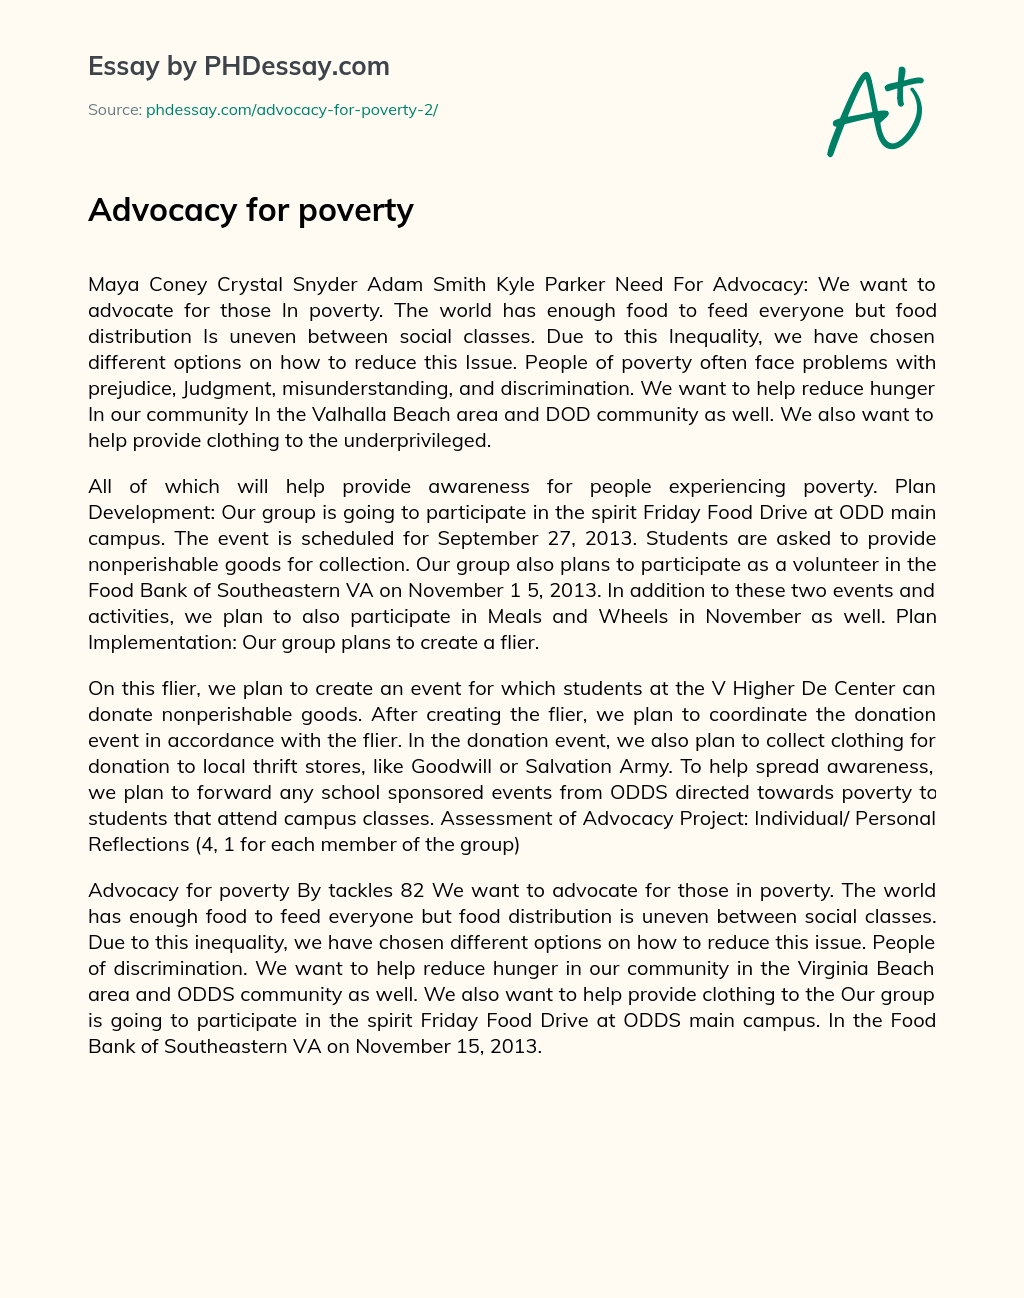 Advocacy for poverty essay